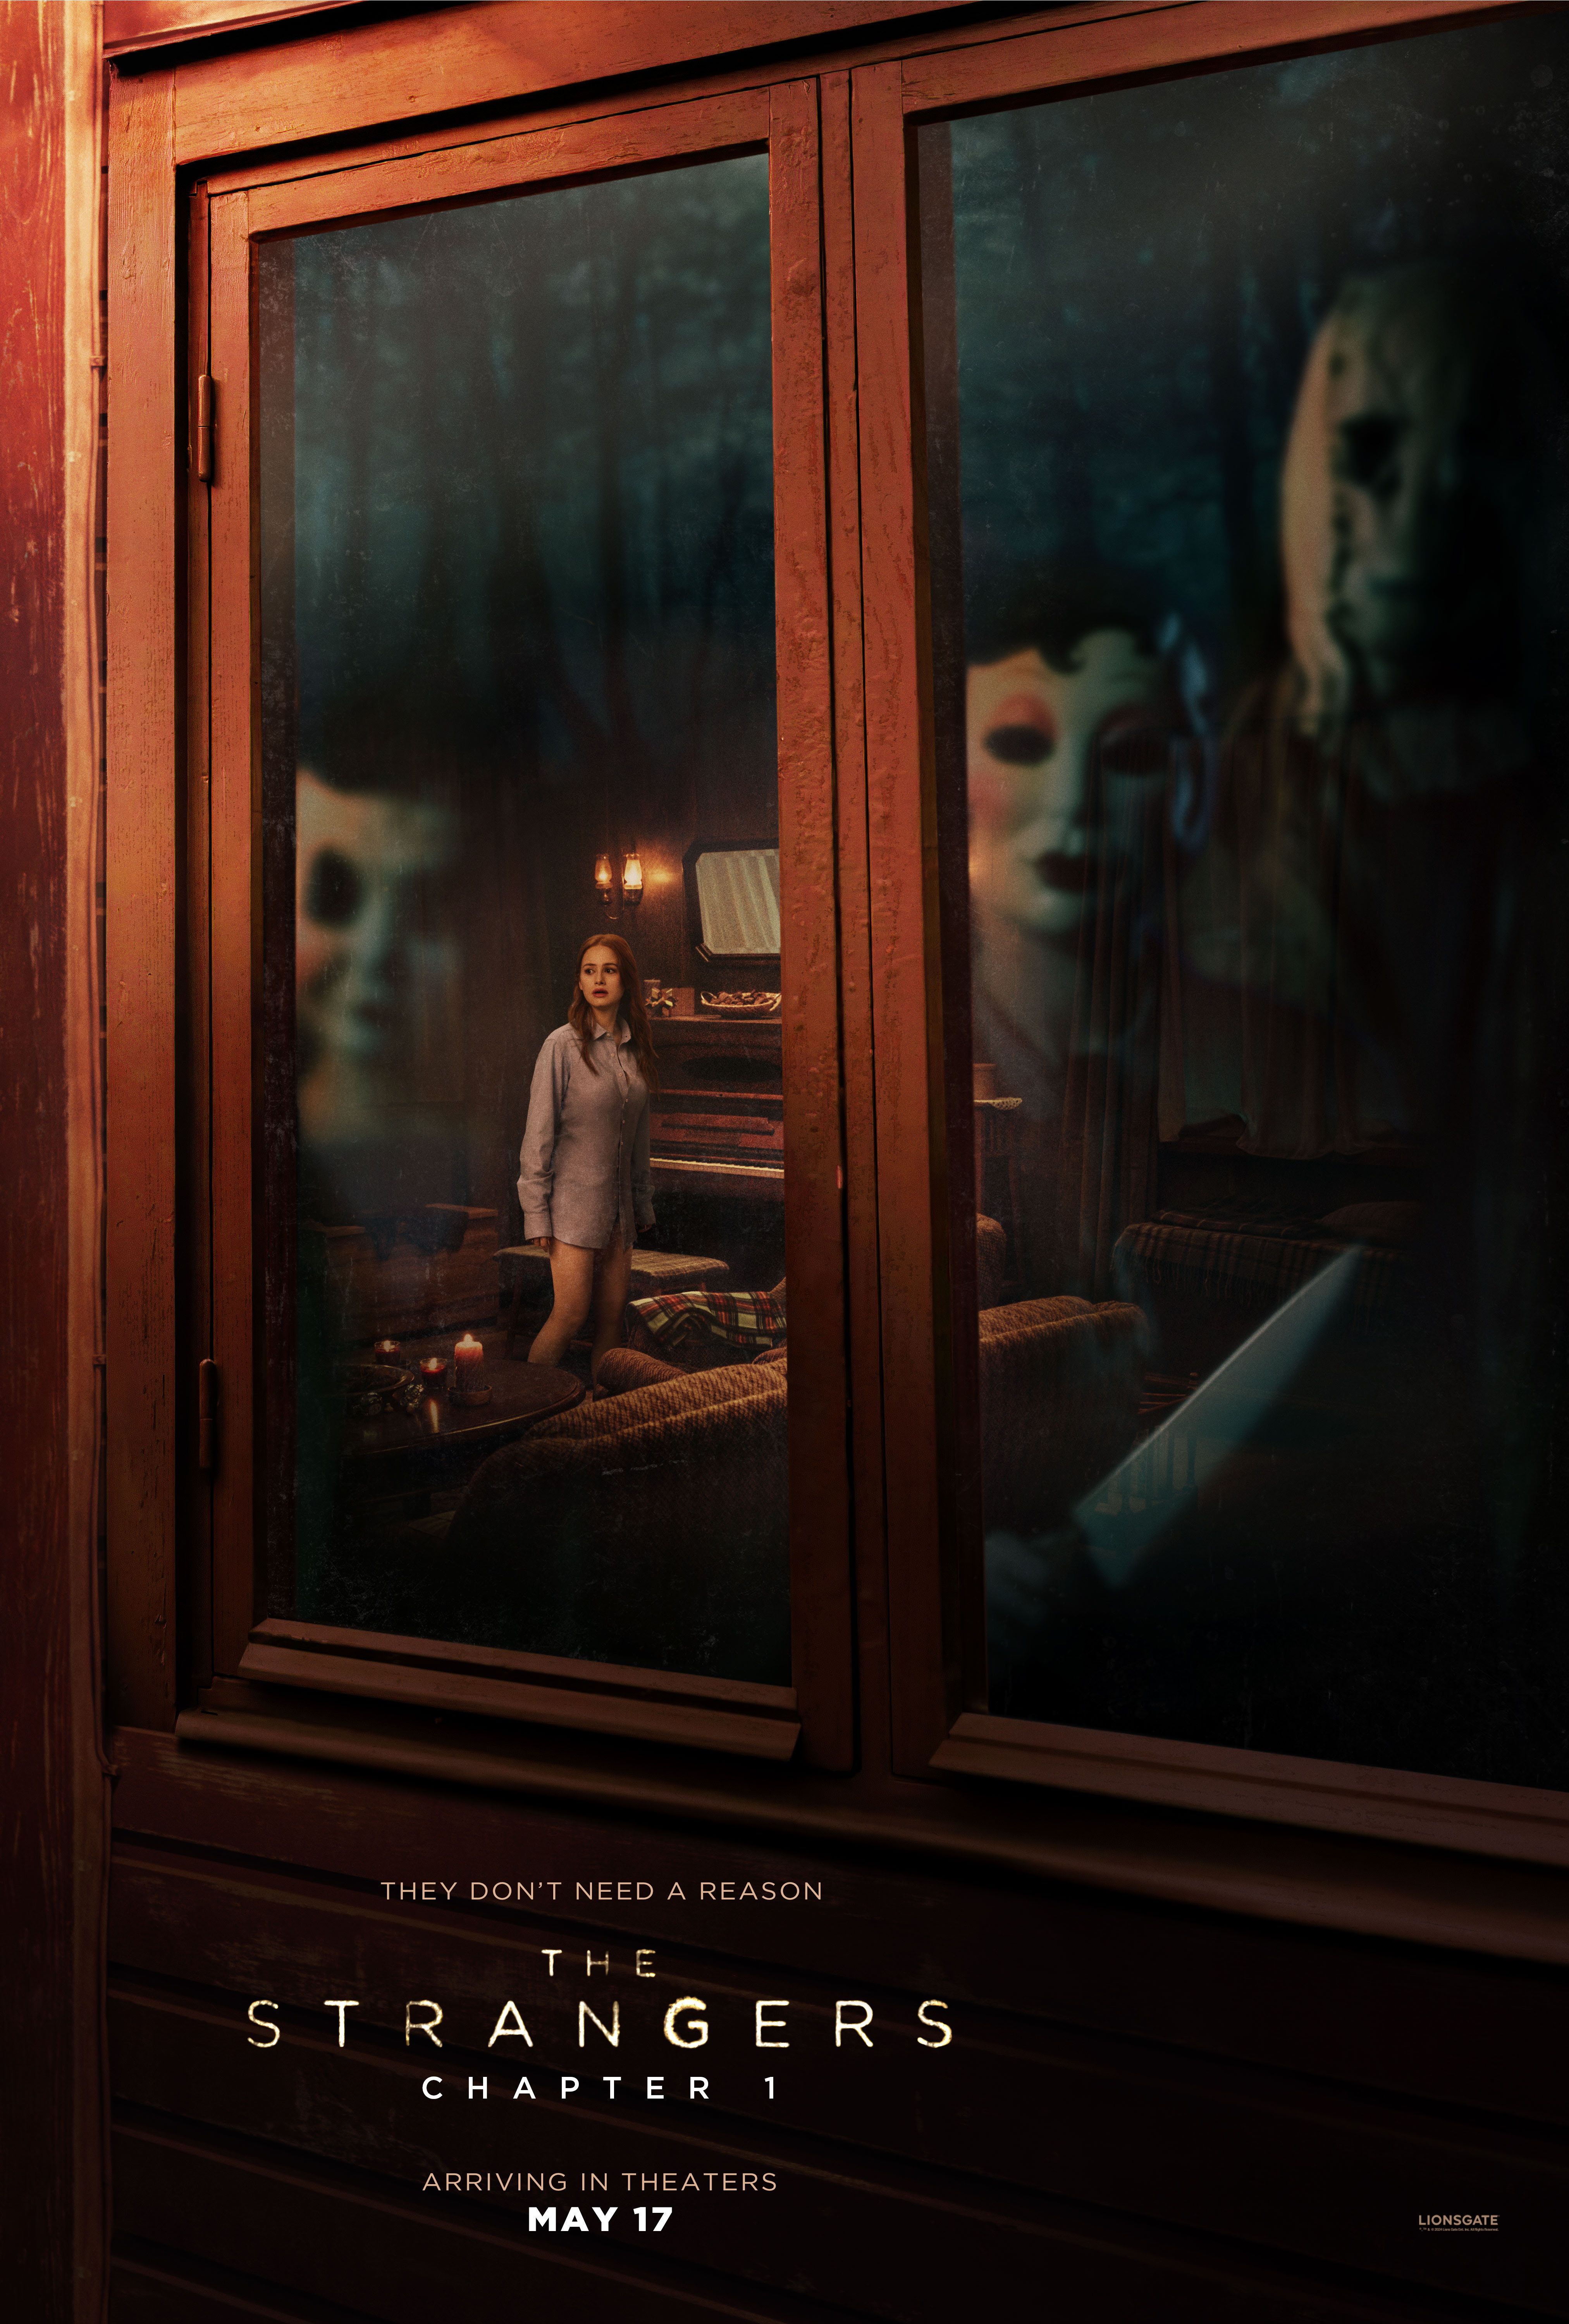 The Strangers Chapter 1 Poster Showing Three Masked figures Looking into a window